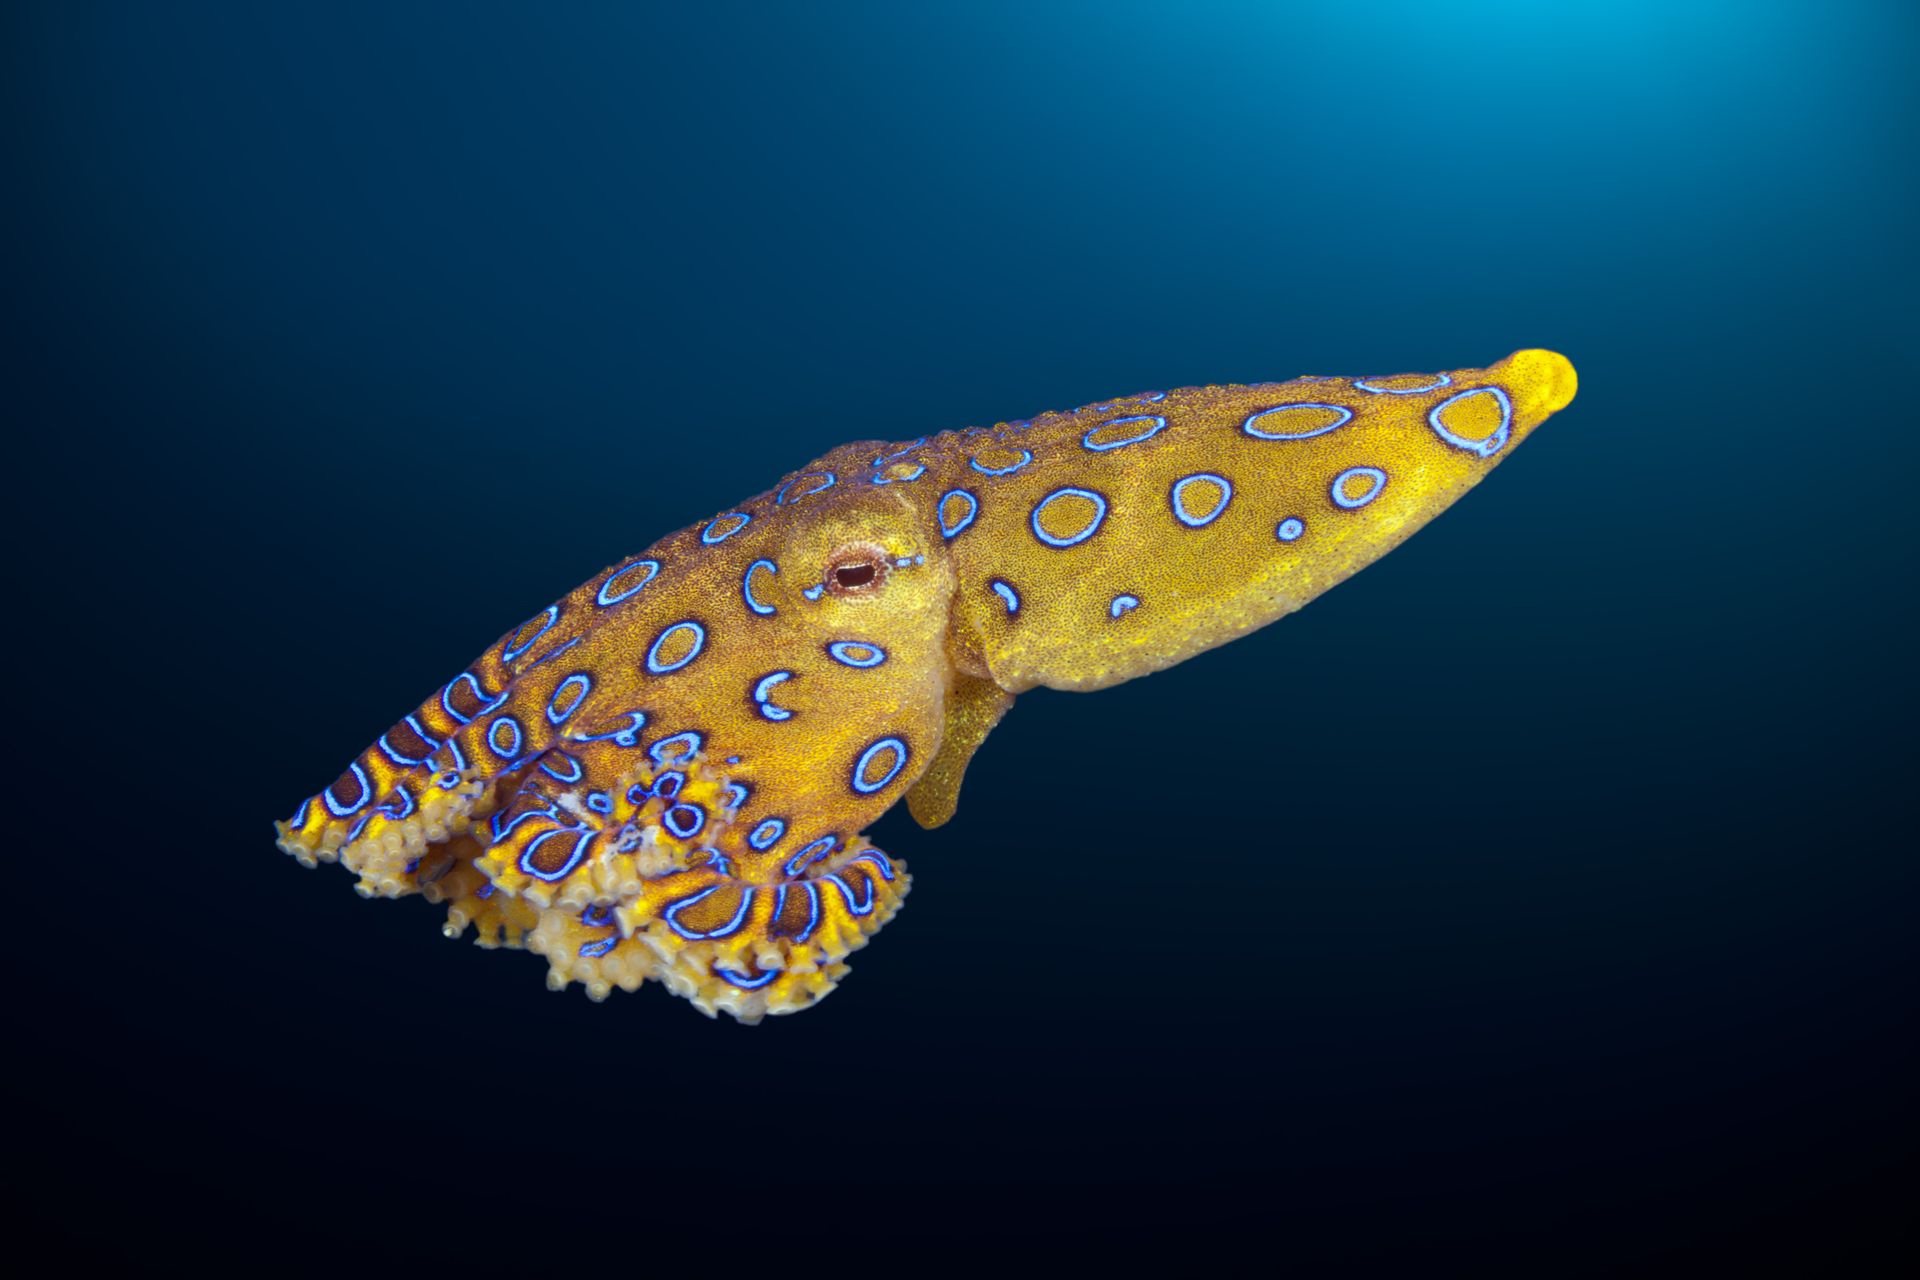 The blue-ringed octopus, a deadly species found mainly in Australia